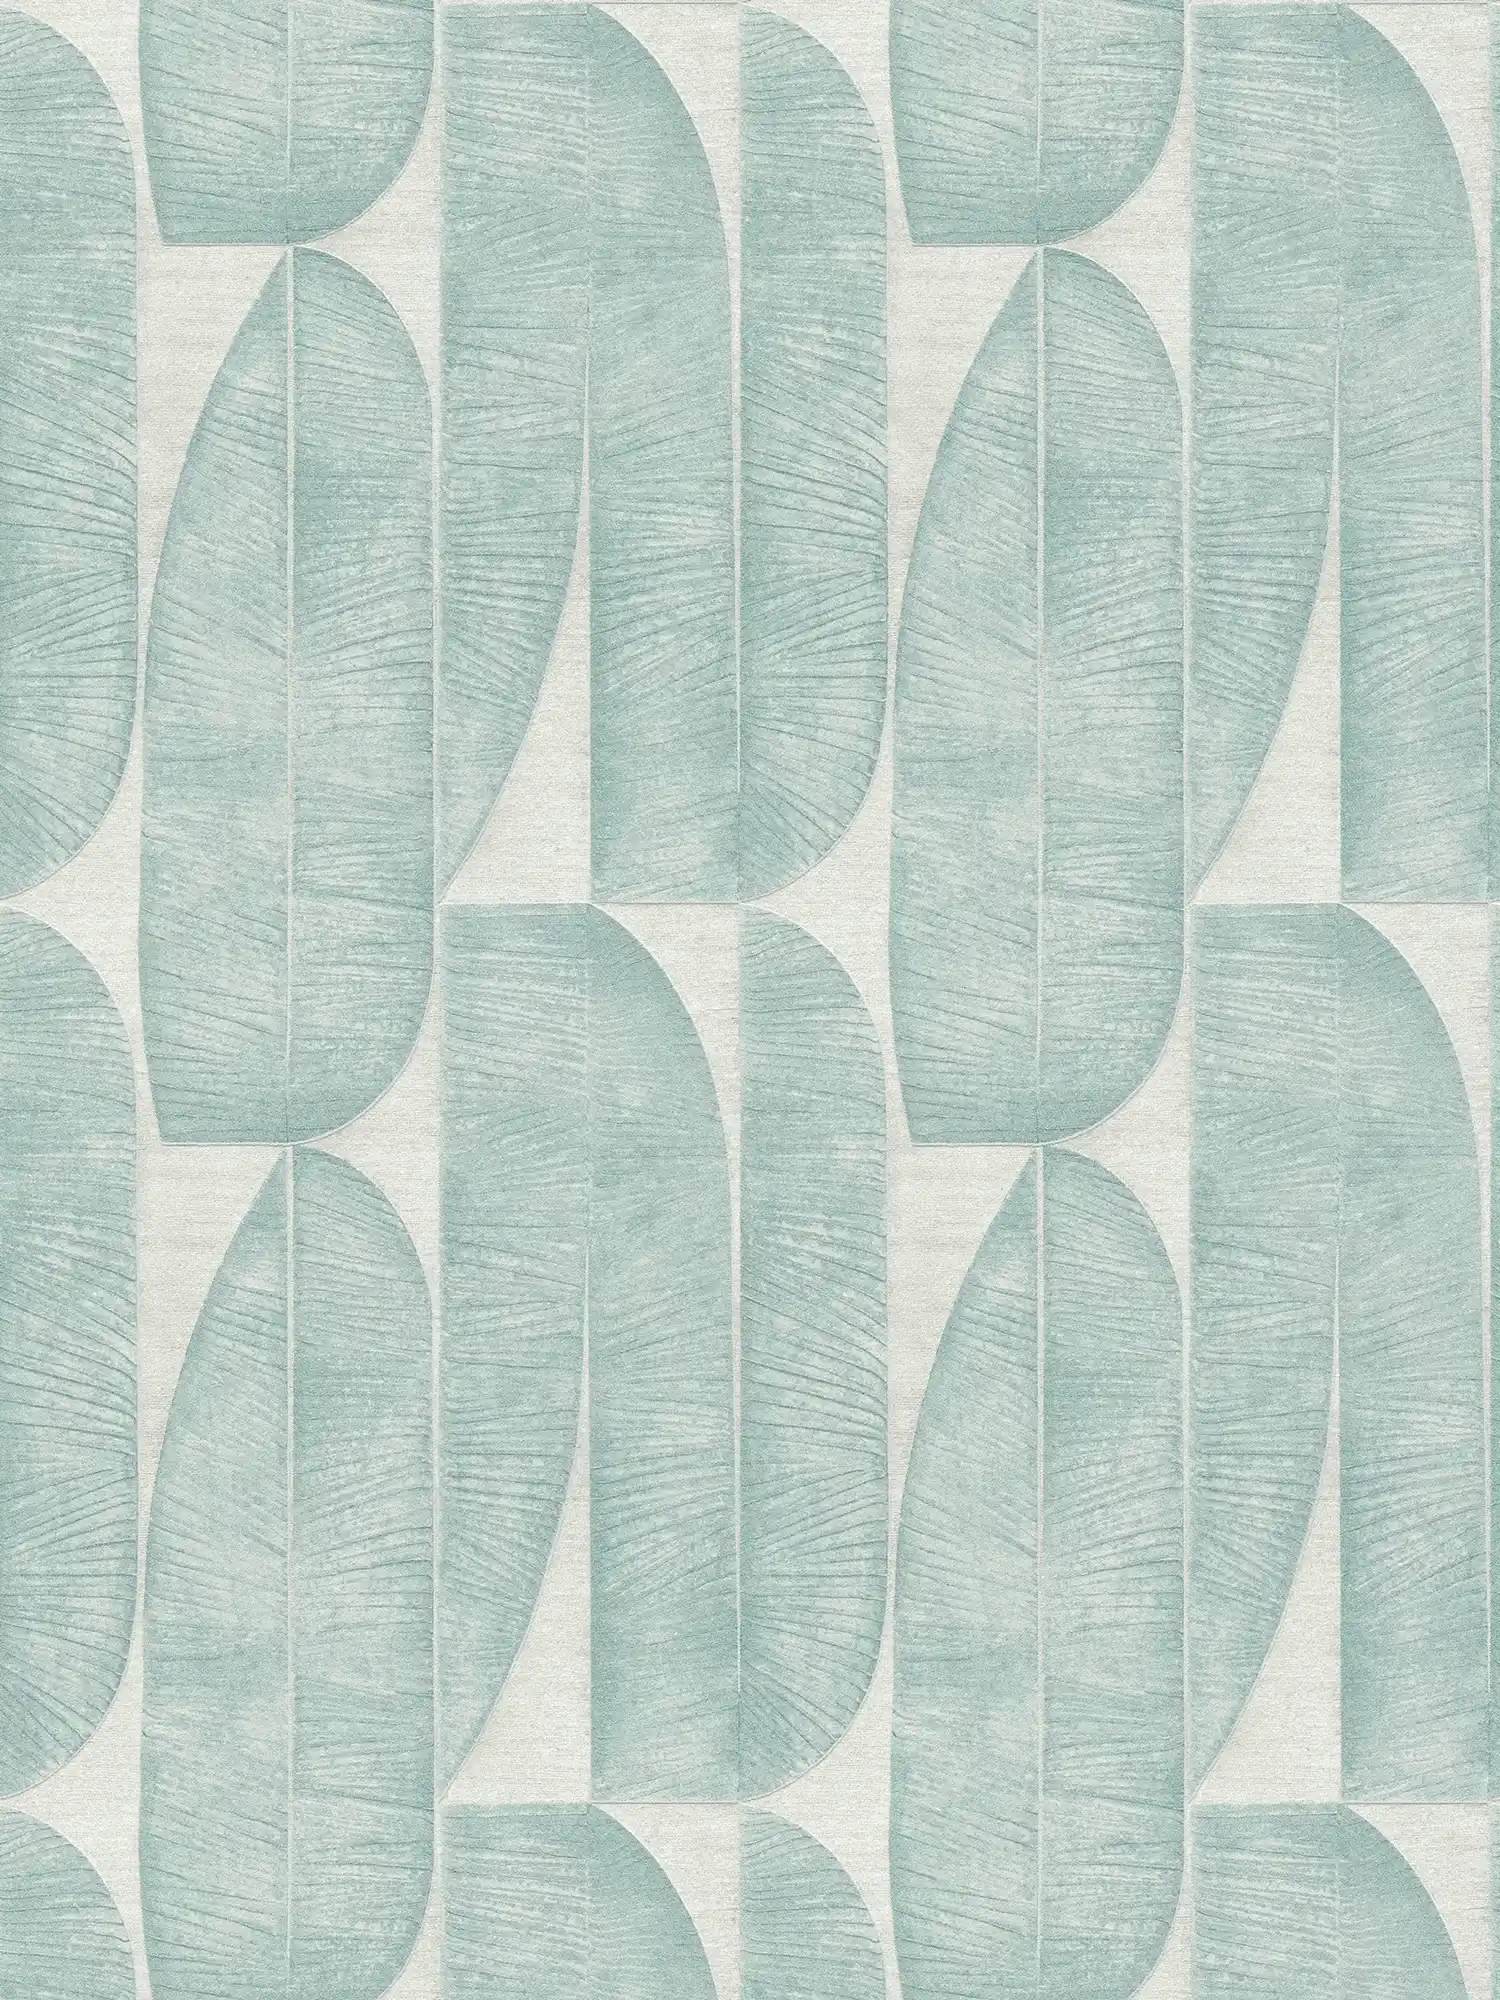 Lightly textured wallpaper with geometric leaf pattern - grey, blue, turquoise
